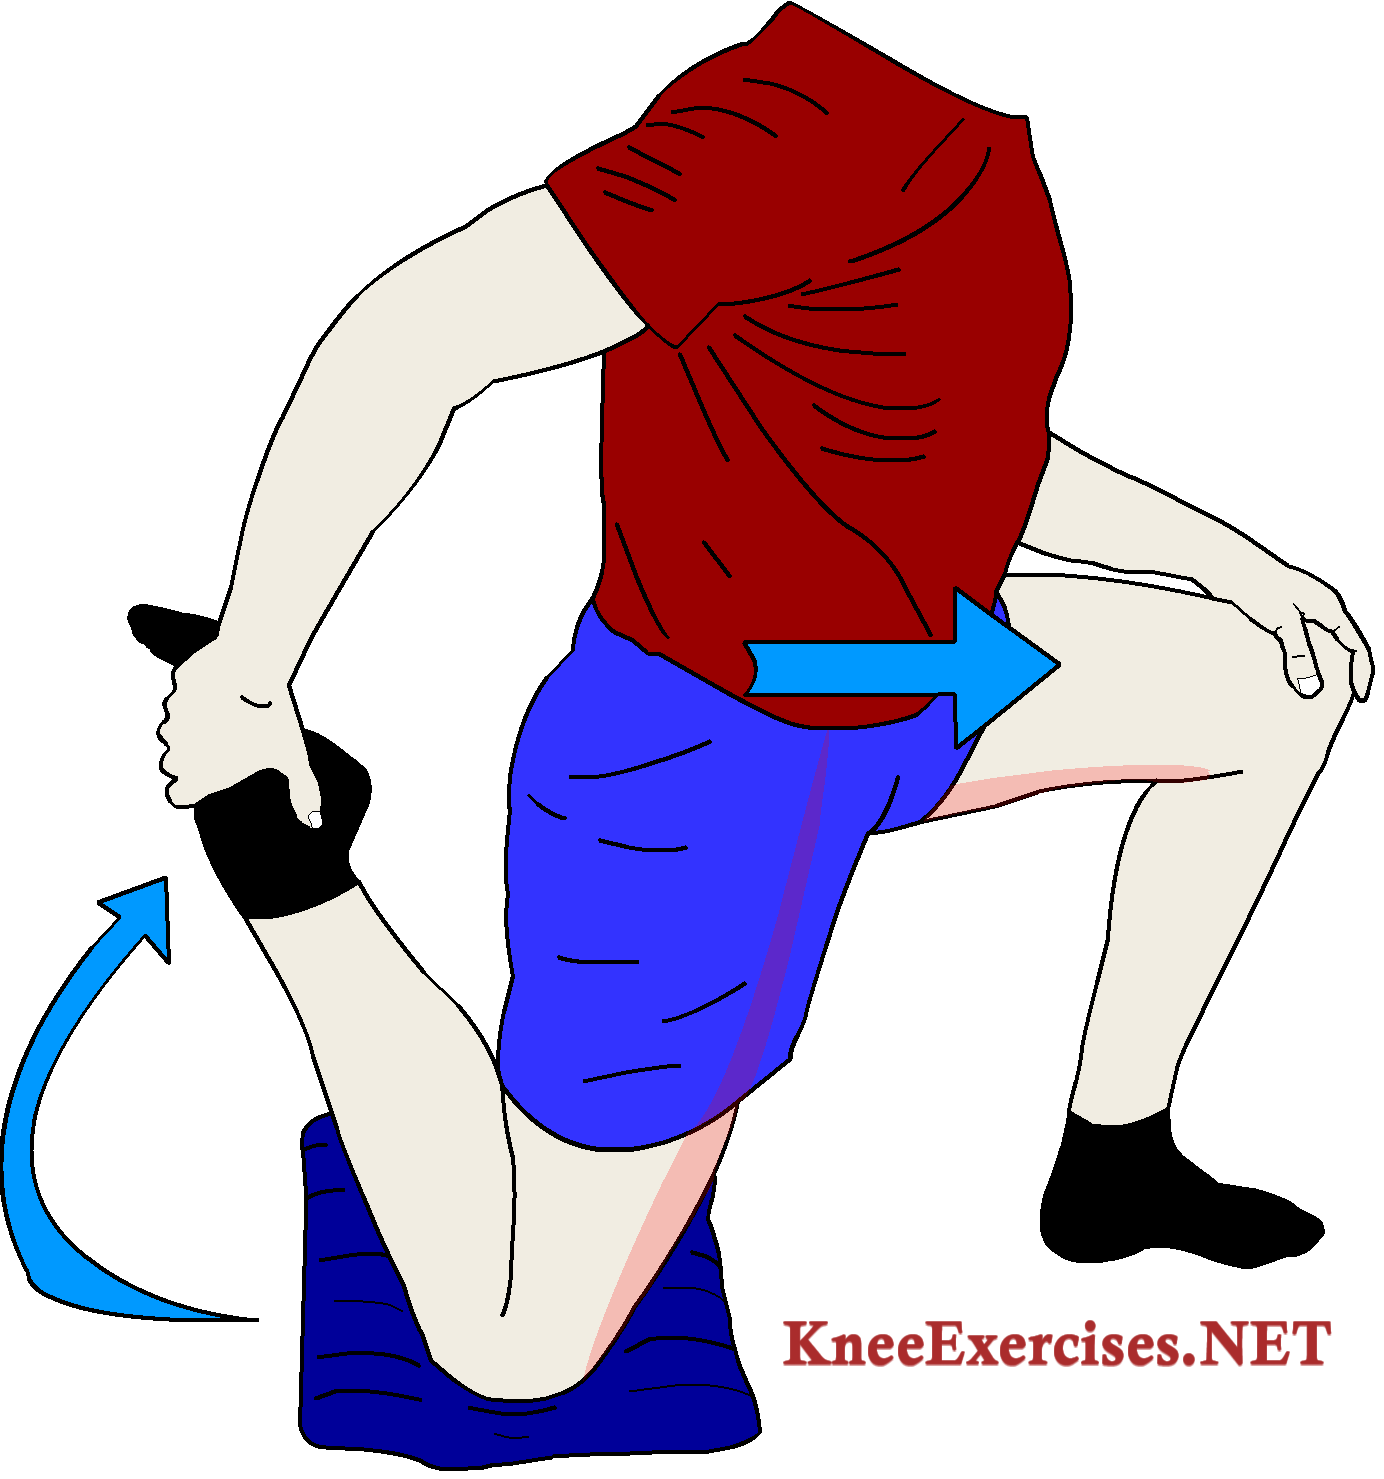 Exercises archives . Injury clipart bad knee